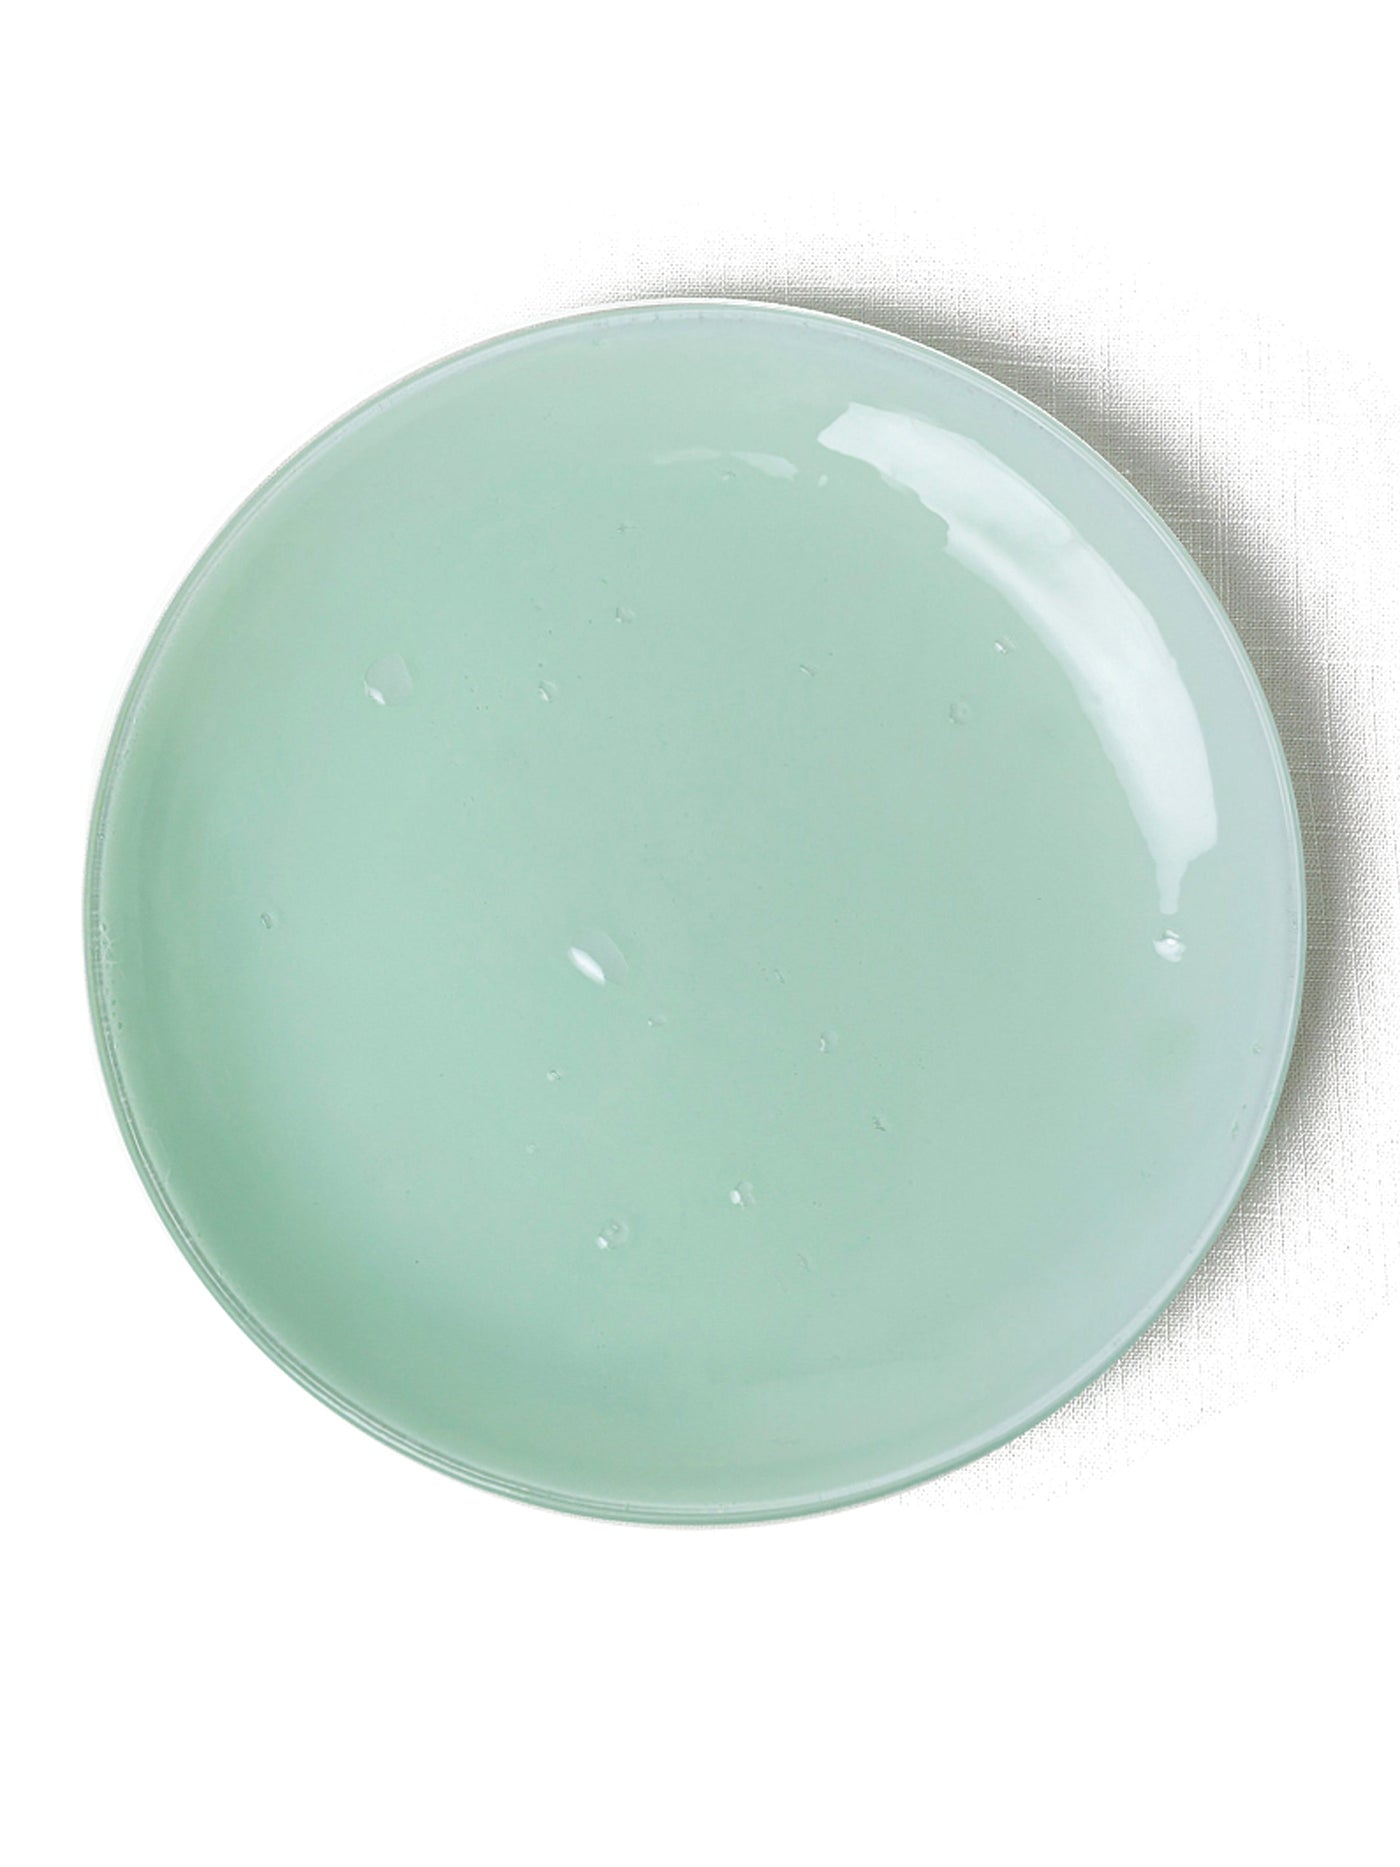 Handmade Glass Dinner Plate in Mint by Caju Collective